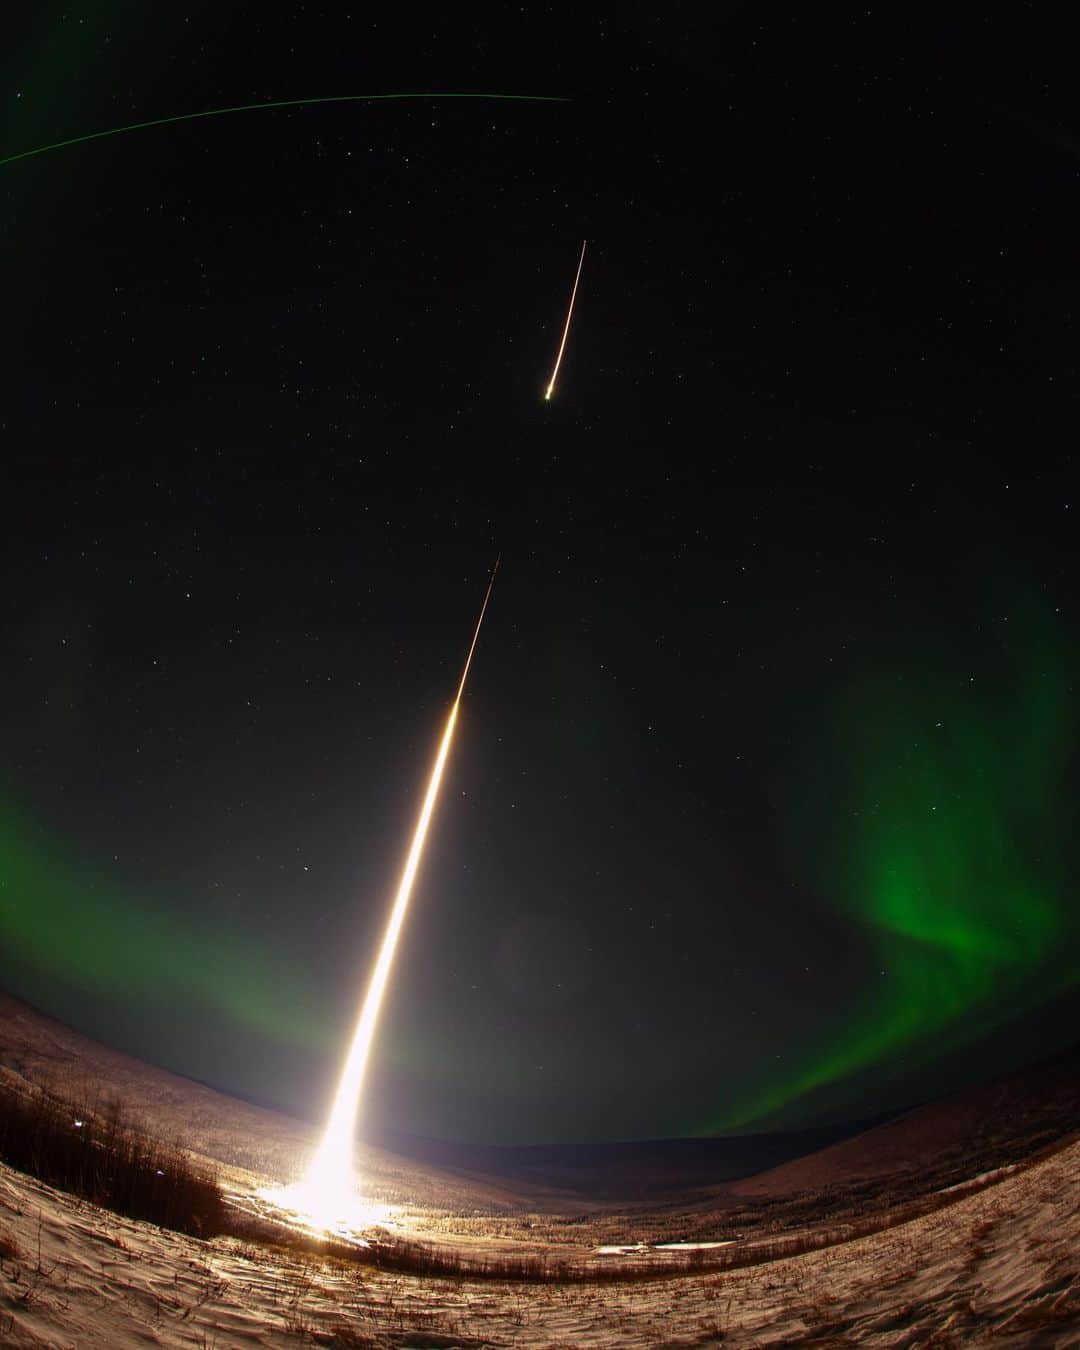 NASAのインスタグラム：「Twice the launches, twice the fun! Two sounding rockets launched from Poker Flat Research Range in Fairbanks, Alaska this week. Yesterday's rocket carried @nasagoddard's DISSIPATION mission into an aurora to study understand how auroras heat the atmosphere and cause high-altitude winds.  Image 1: A long-exposure photograph of a sounding rocket launching into a night sky highlighted by aurora. The sounding rocket is a bright white streak, leaving from a snow-covered ground and moving from bottom left to upper right. A small break in the streak represents the first stage of the rocket burning out and the second stage igniting. A soft, green aurora frames the edges of the image, with many white stars speckled through the black sky. A bright green line toward the top of the frame is a lidar beam. A fisheye lens was used for the photograph, creating a curve for the ground and lidar beam.  Image 2:  A long-exposure photograph of a sounding rocket launching into a cloudy night sky. The sounding rocket is a bright white streak, leaving from a snow-covered ground and moving from bottom left to upper right. The ground is snow covered in the bottom of the frame with and at the right of the frame is a photographer setting up two camera tripods.  Photo Credit: NASA/Lee Wingfield  #Aurora #NASA #SoundingRocket #RocketLaunch」